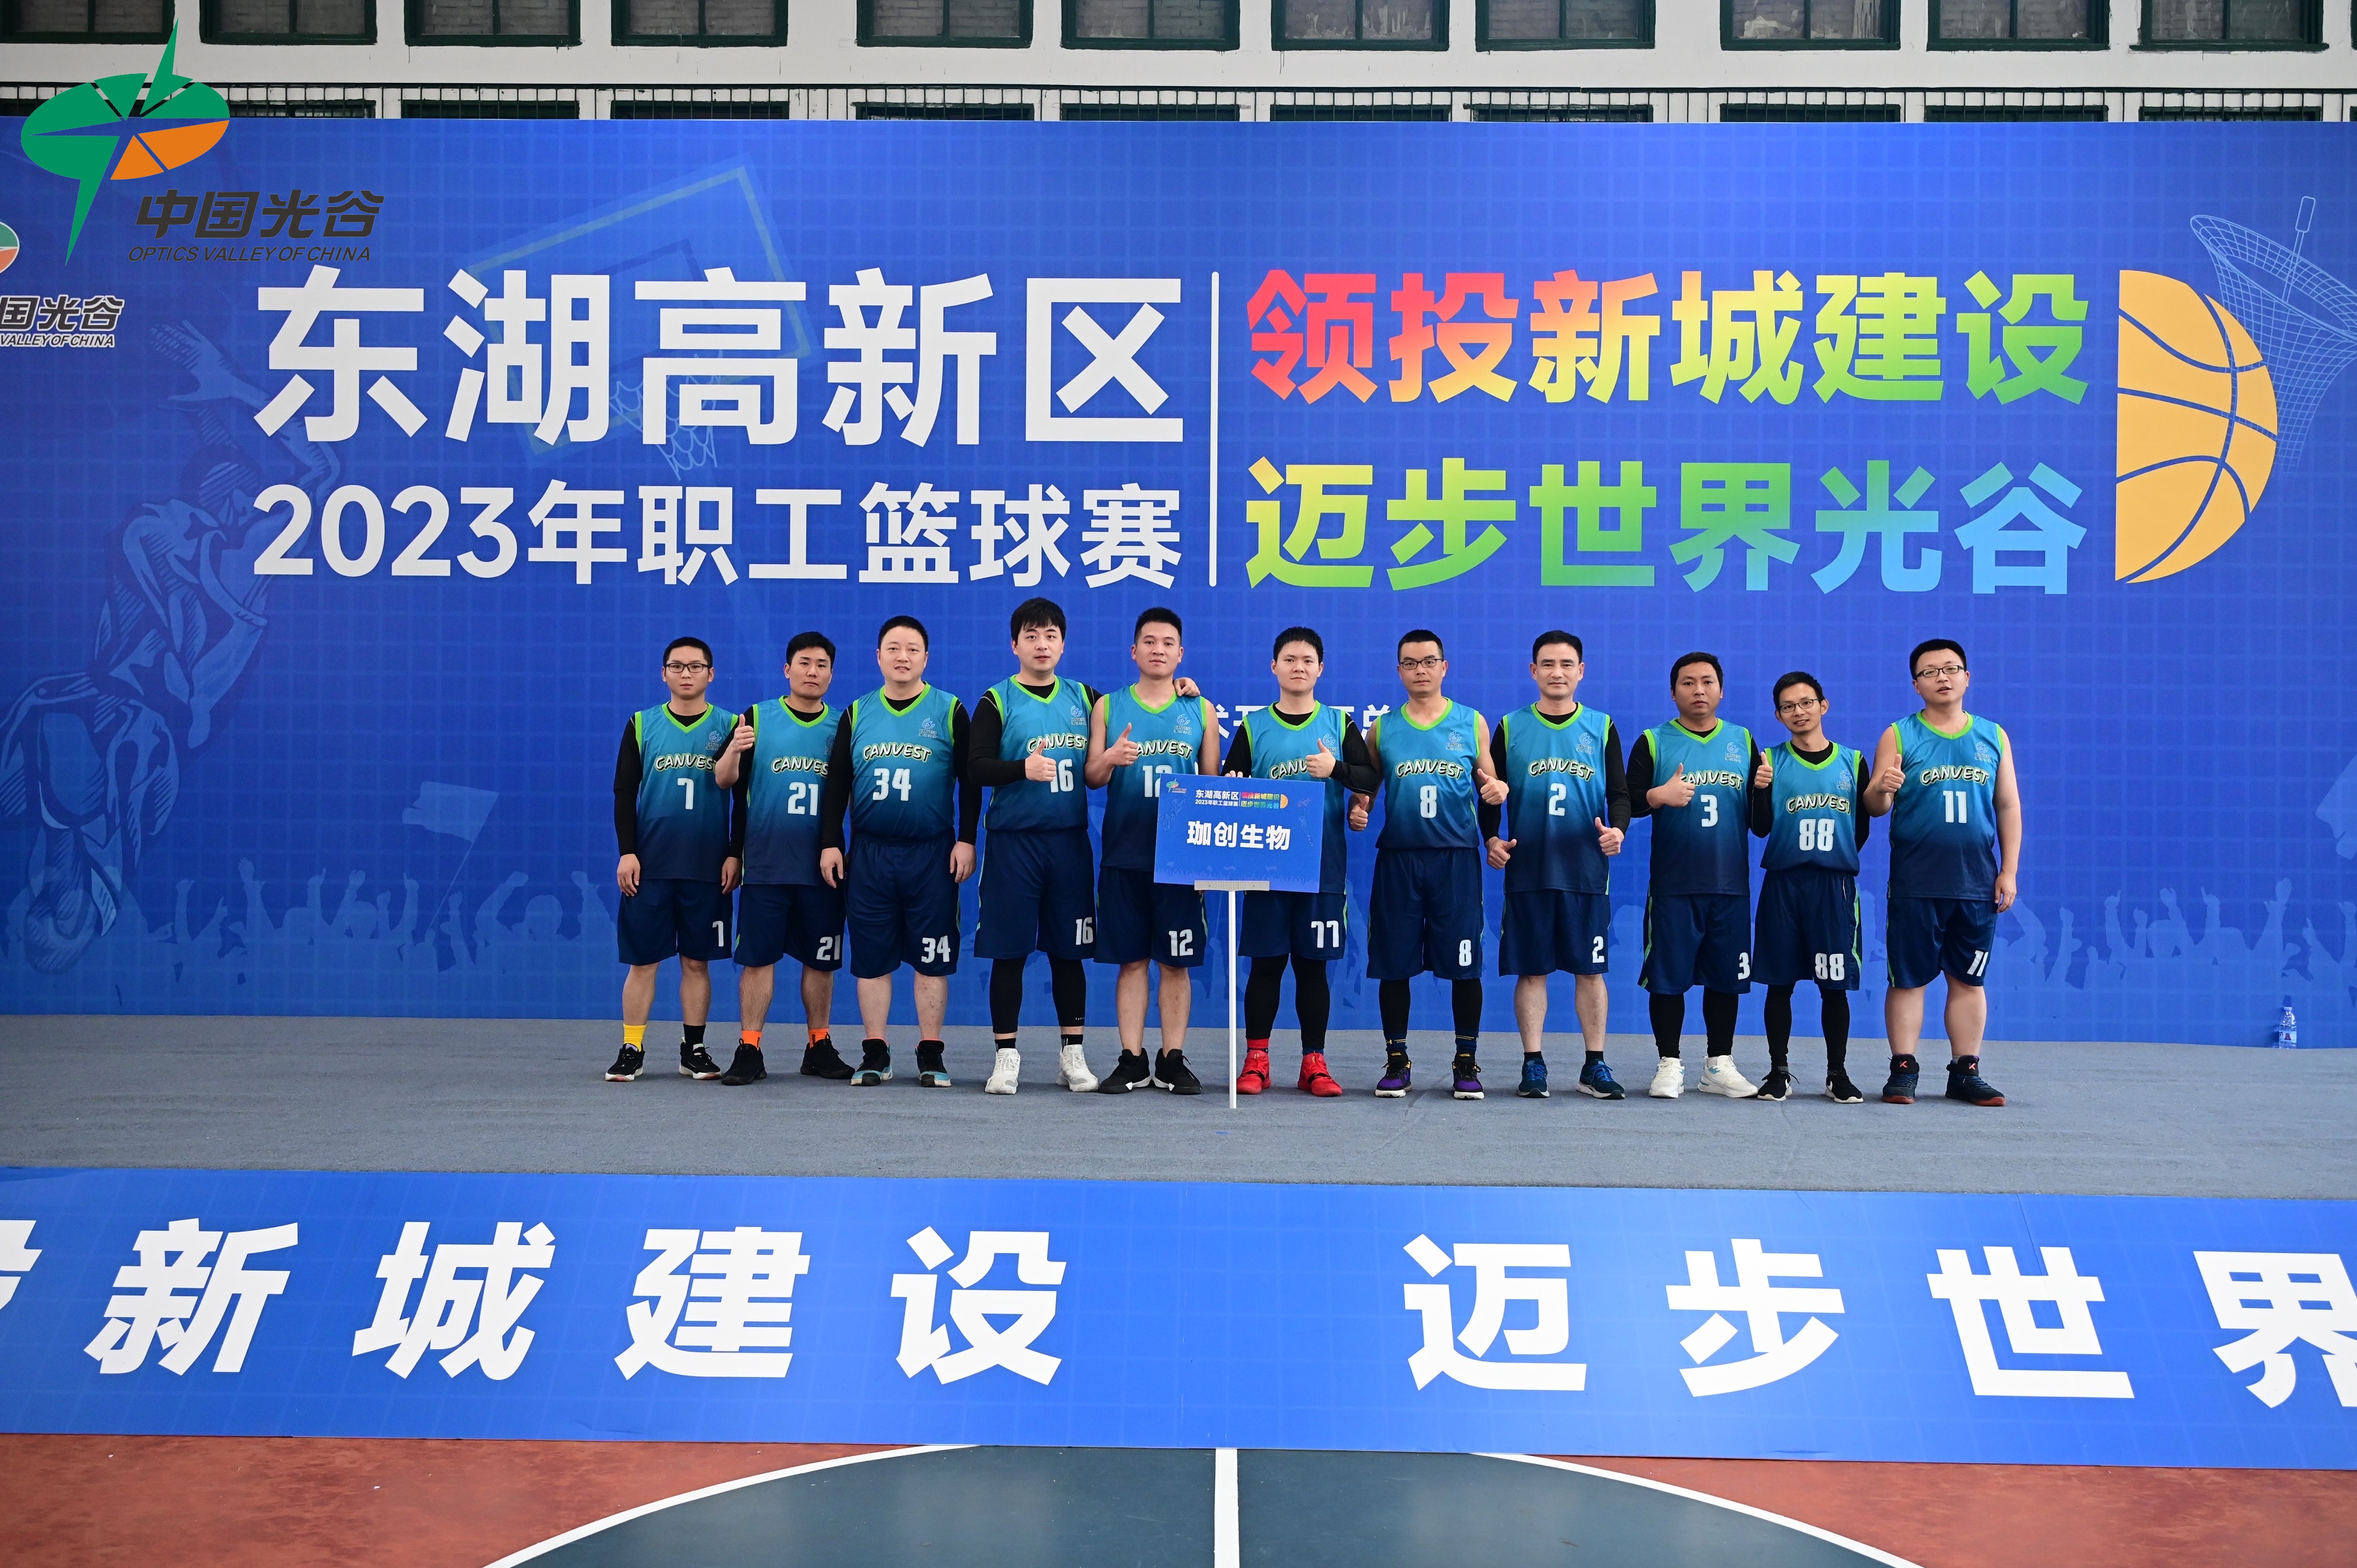 Jia Chuang Ji participated in the 2023 staff basketball game of East Lake High-tech Zone